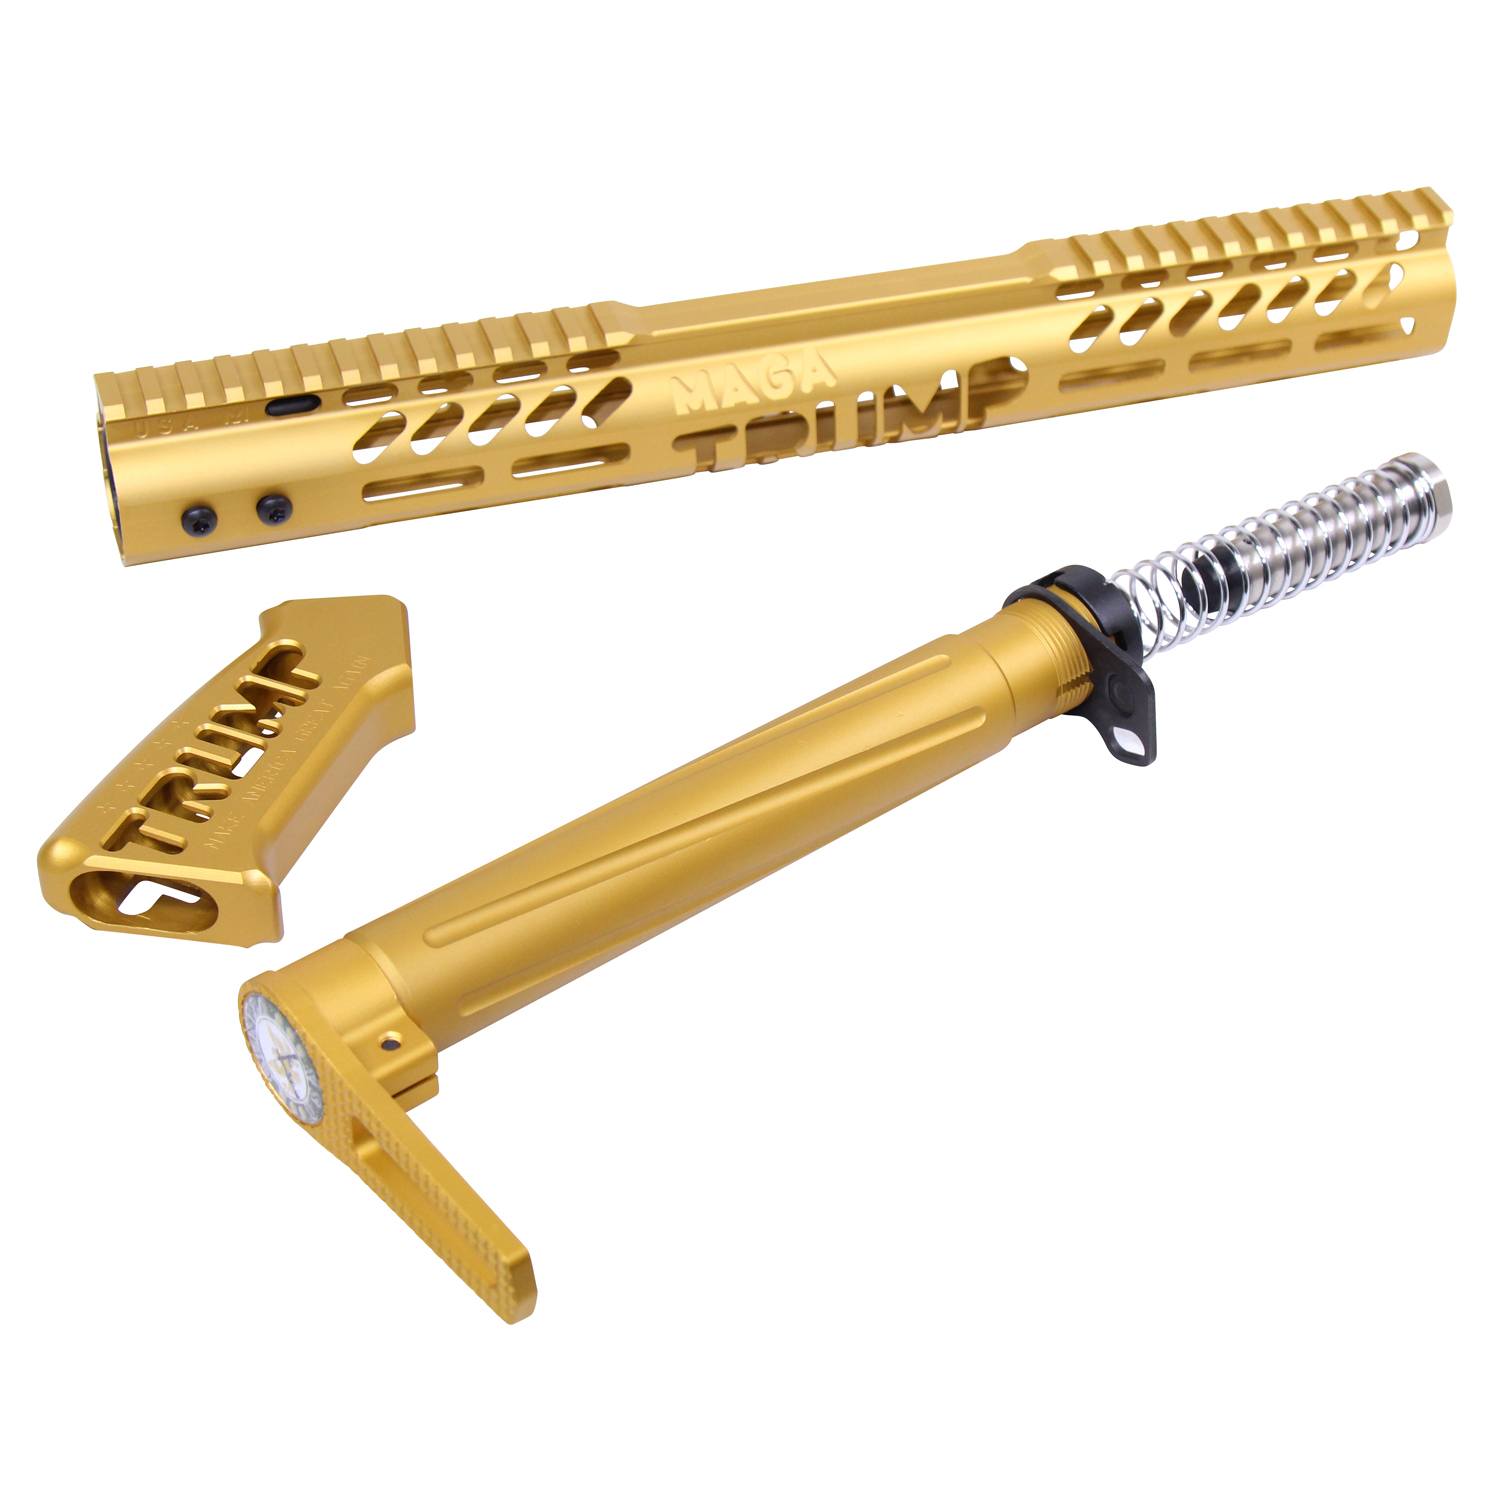 AR-15 "Trump" Series Limited Edition Pistol Grip in Anodized Gold